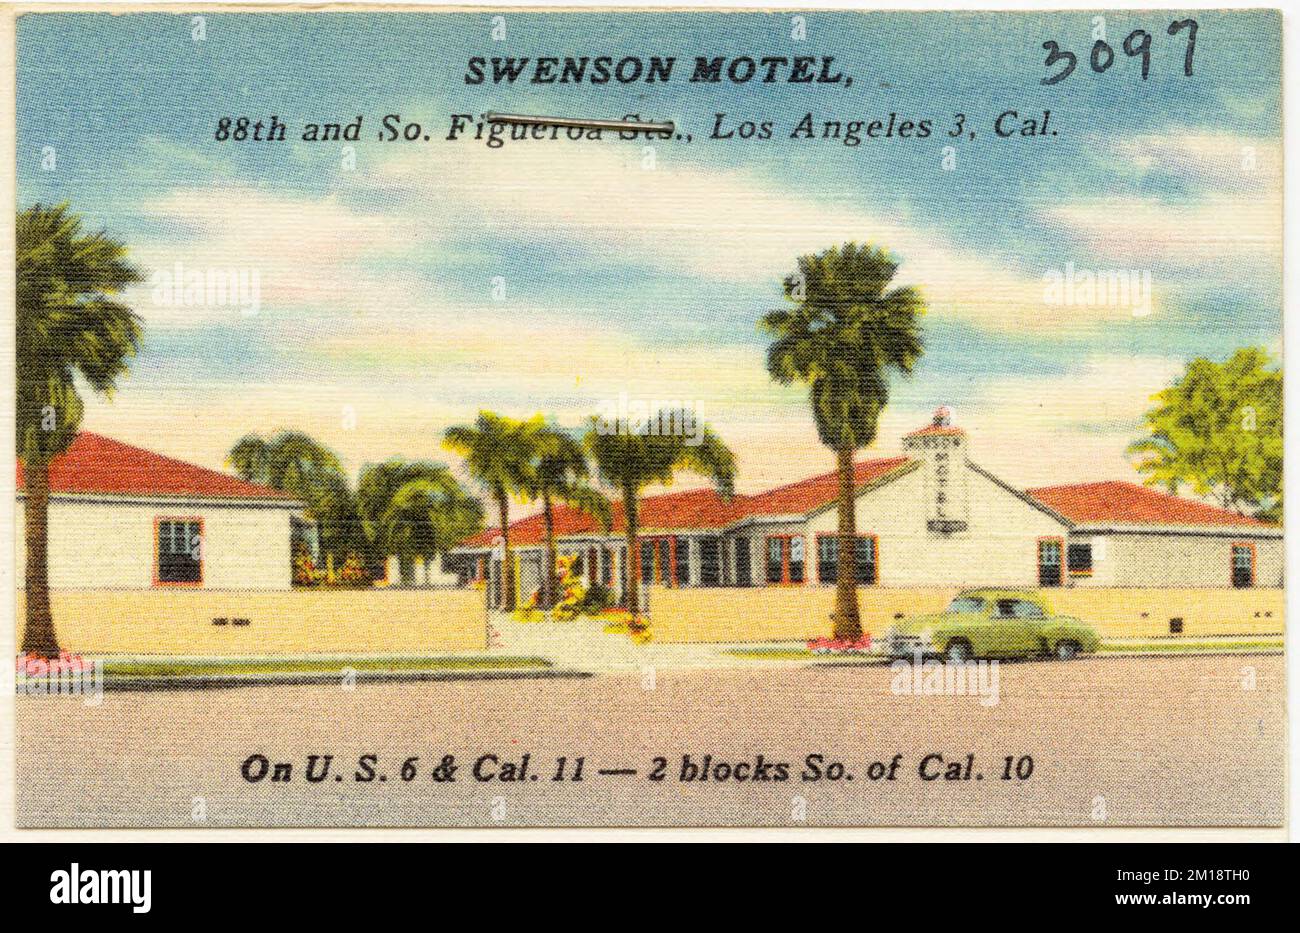 Swenson Motel, 88th and So. Figueroa Sts., Los Angeles 3, Cal. , Motels, Tichnor Brothers Collection, postcards of the United States Stock Photo